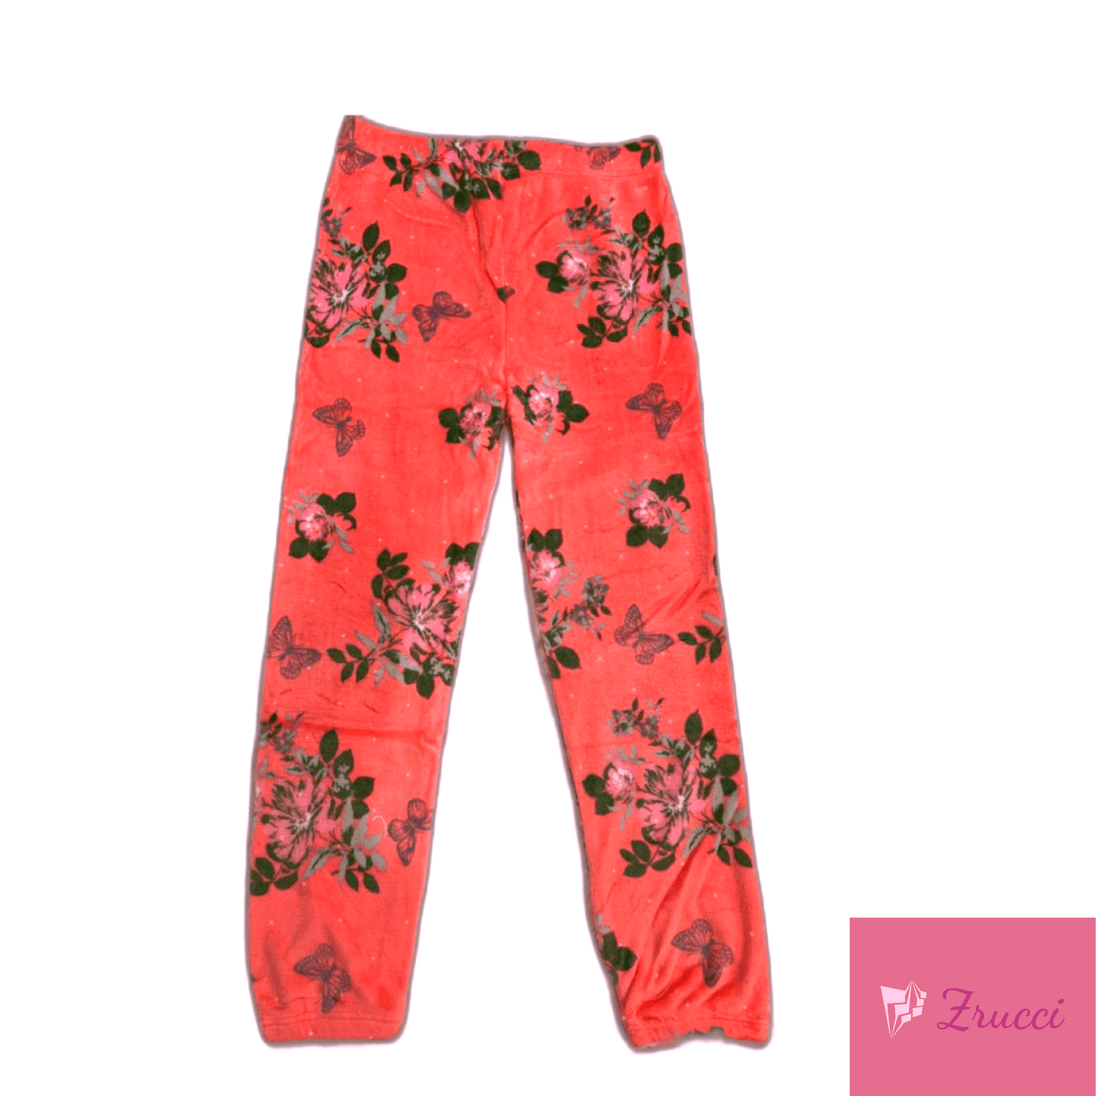 3 PACK! Women's Flower Ultra Plush Stretchy Cozy Pajama/Lounge Pants (Multiple Sizes and Colors) - PremiumBrandGoods